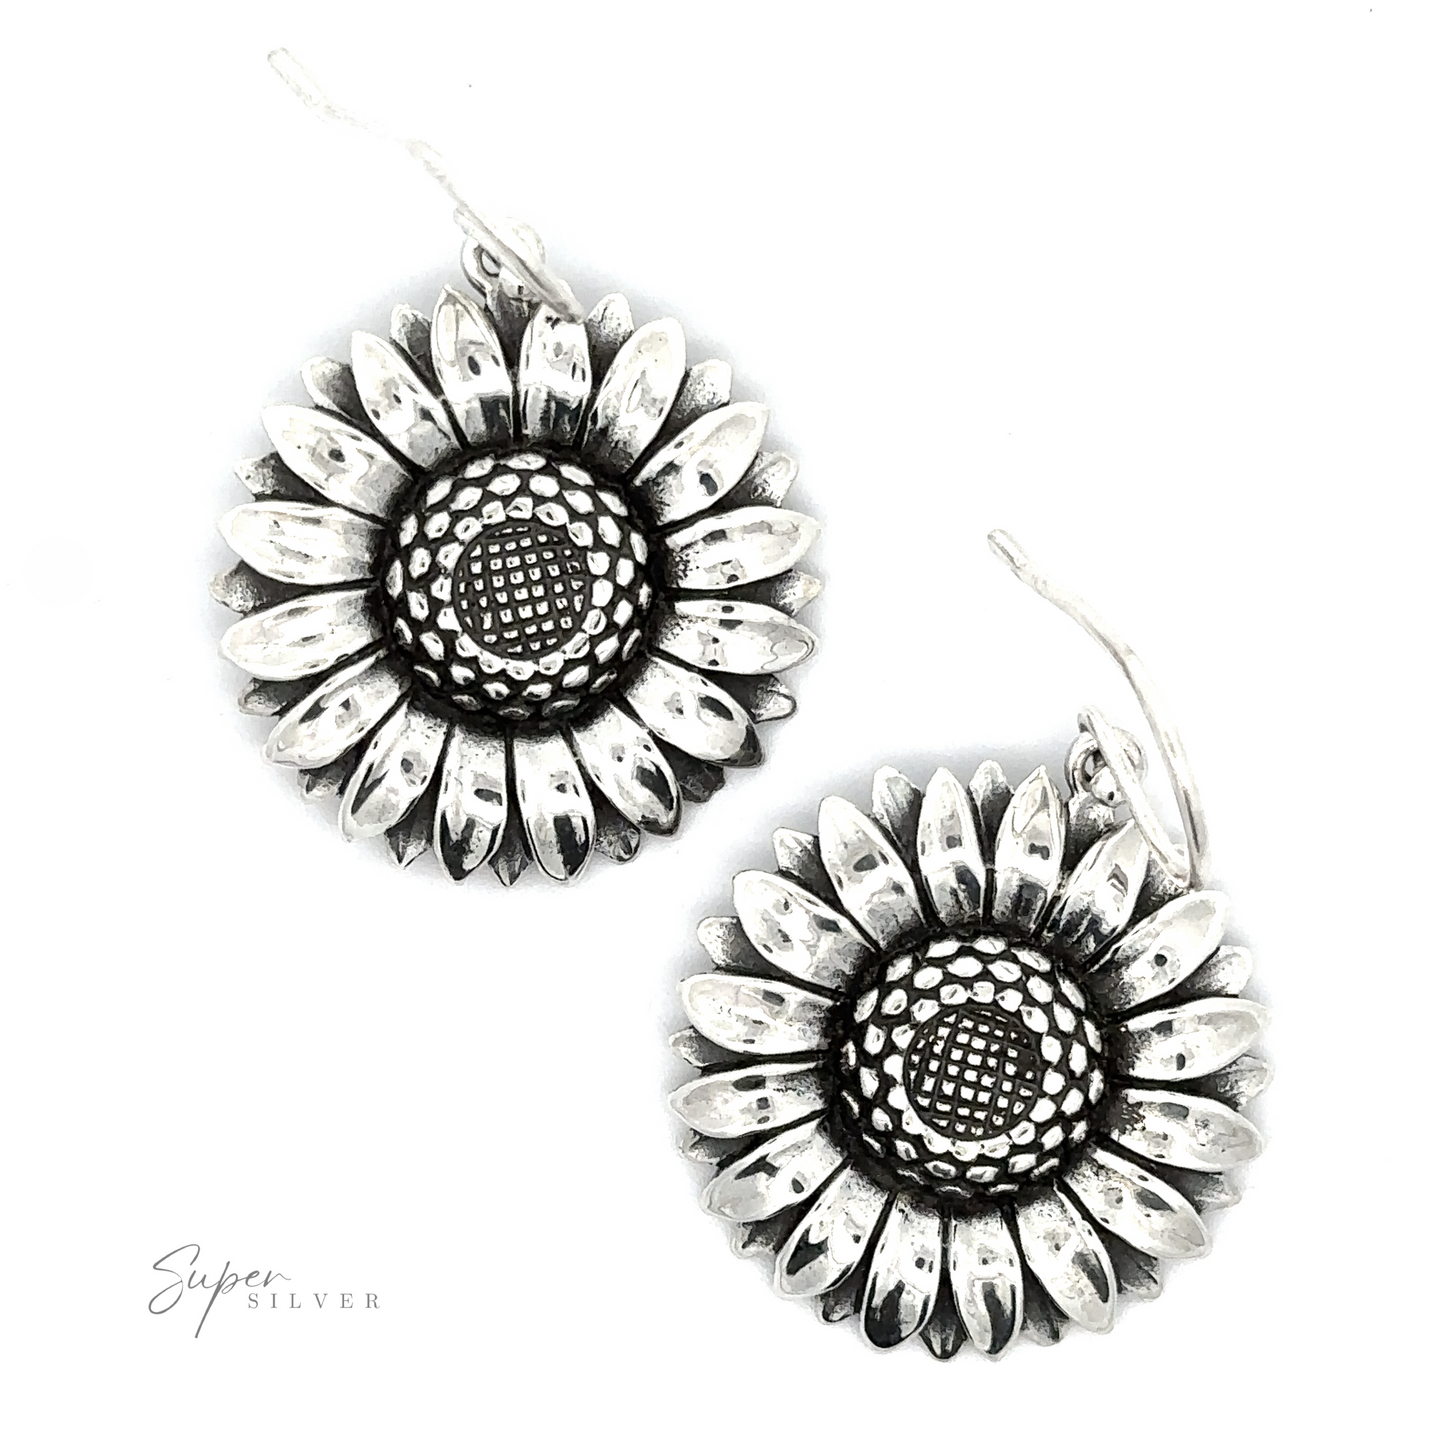 
                  
                    Pair of Silver Sunflower Earrings with detailed petal and center textures, displayed against a white background.
                  
                